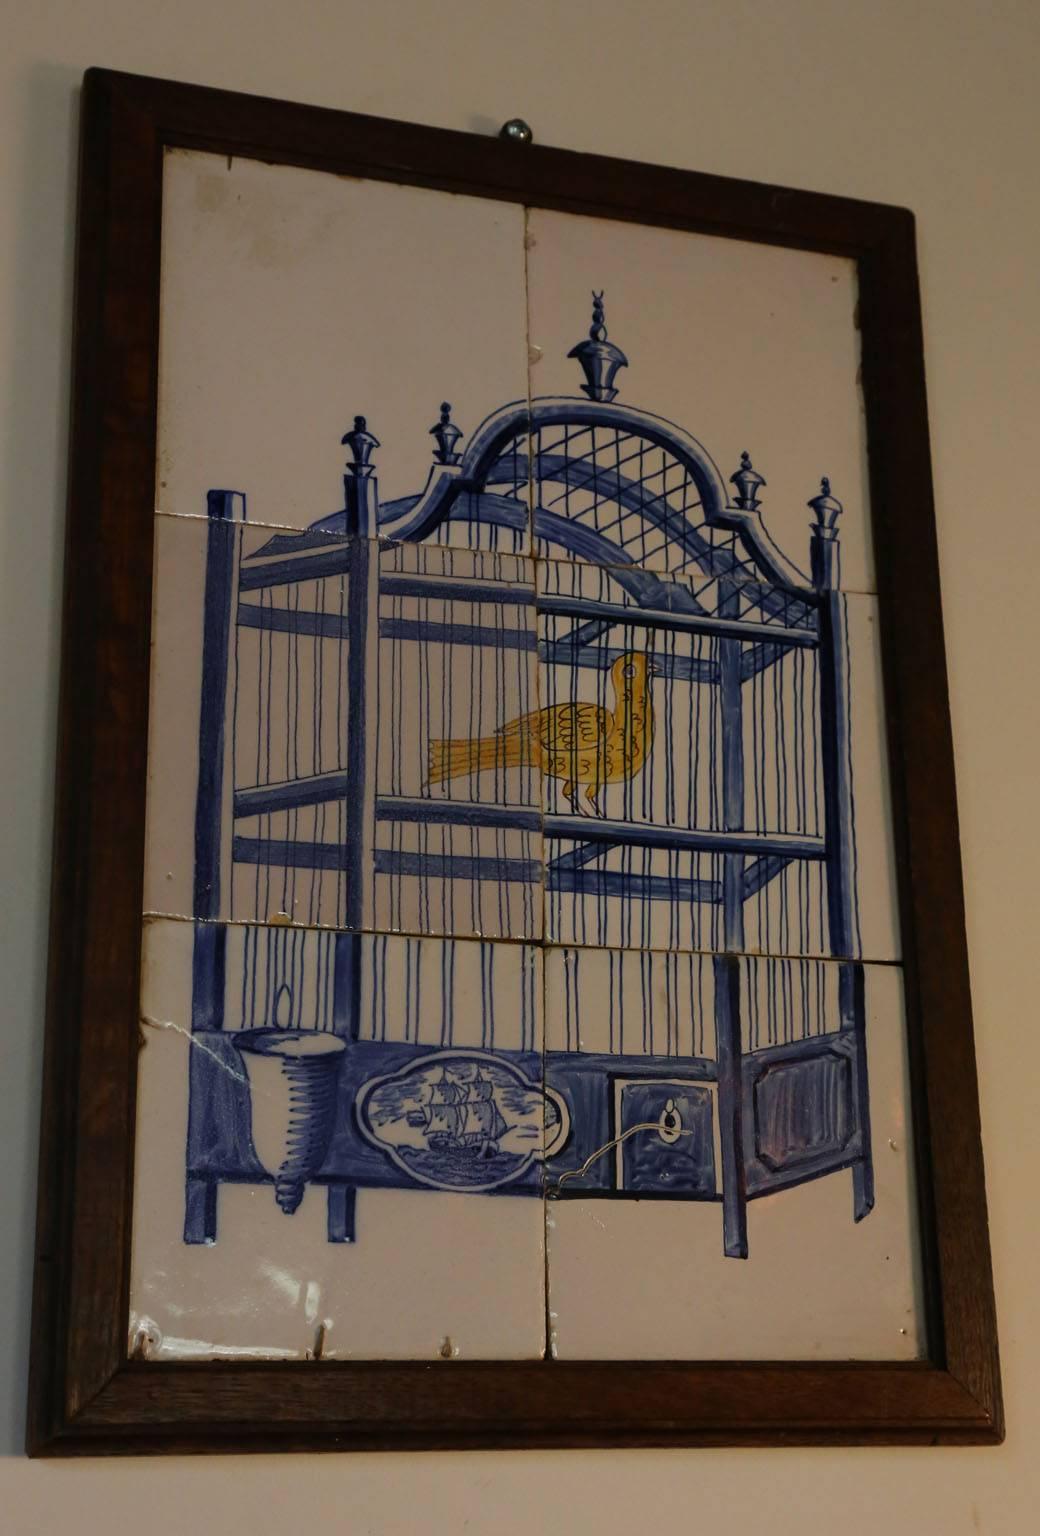 19th century Delft tile wall picture of a bird in a cage with the typical blue color used in Delft tiles, with a painted yellow bird and a central ship on the cage.